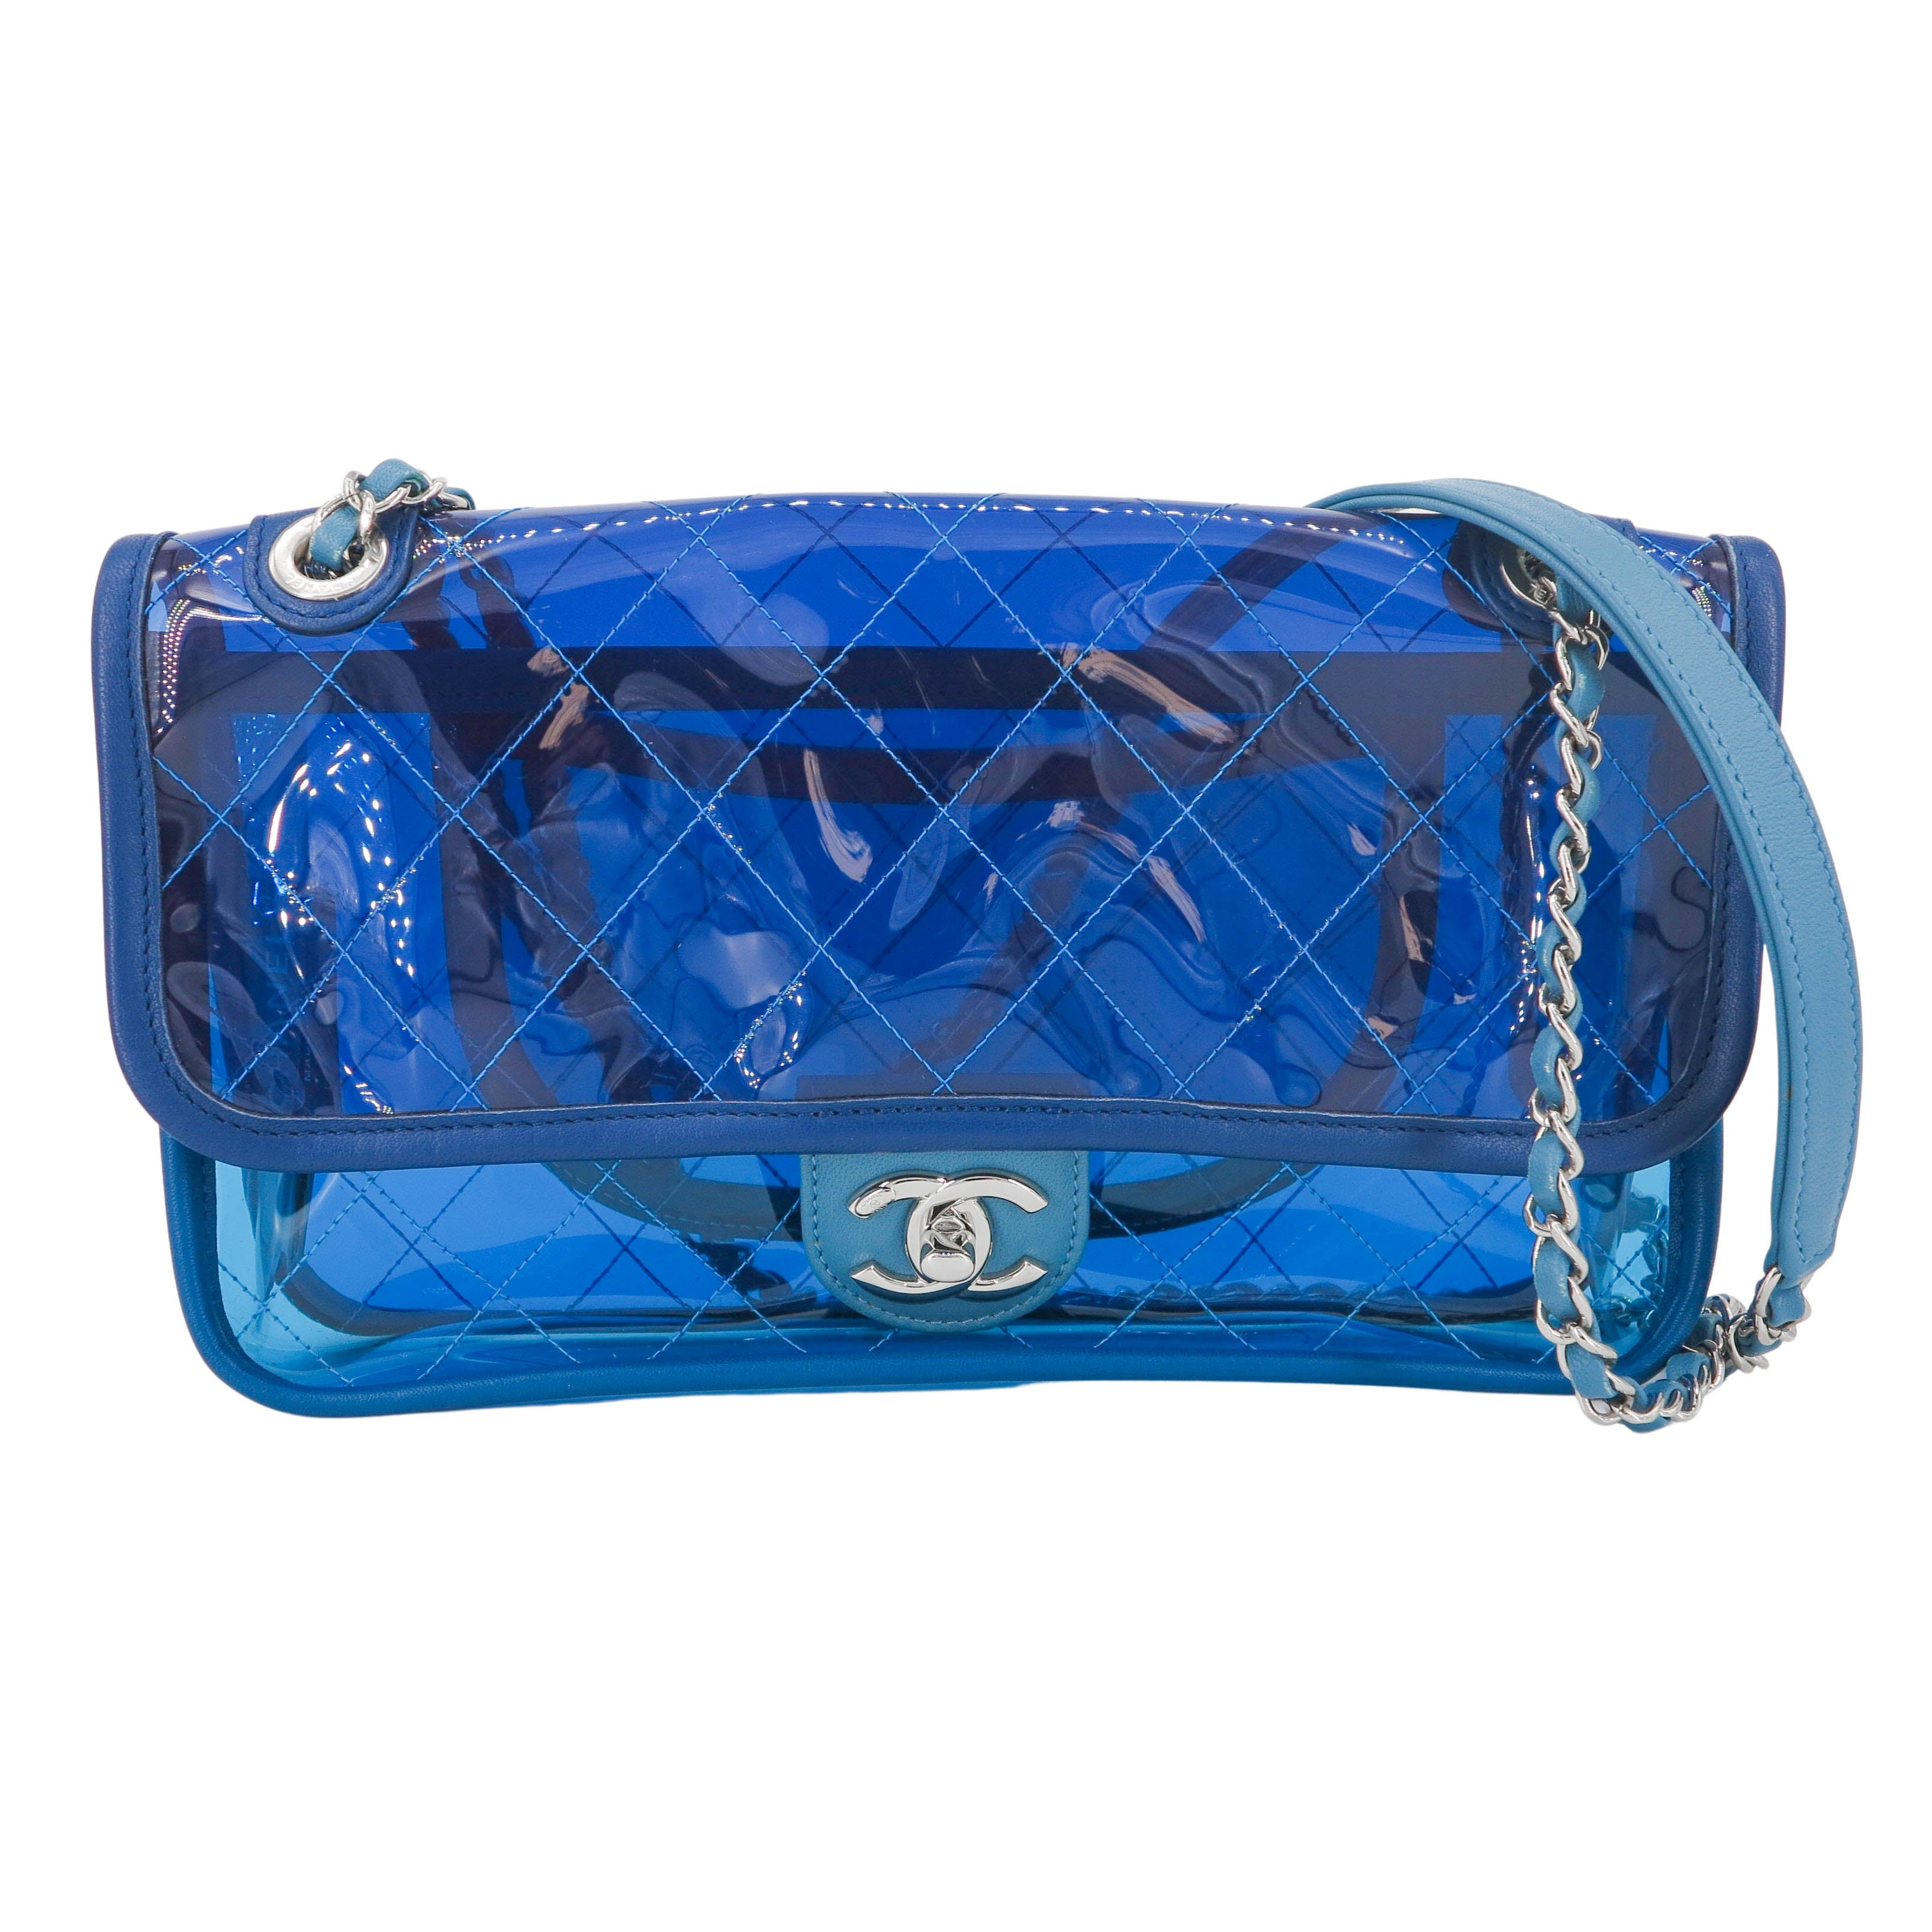 Chanel Blue Transparent Quilted PVC Coco Splash Large Shopping